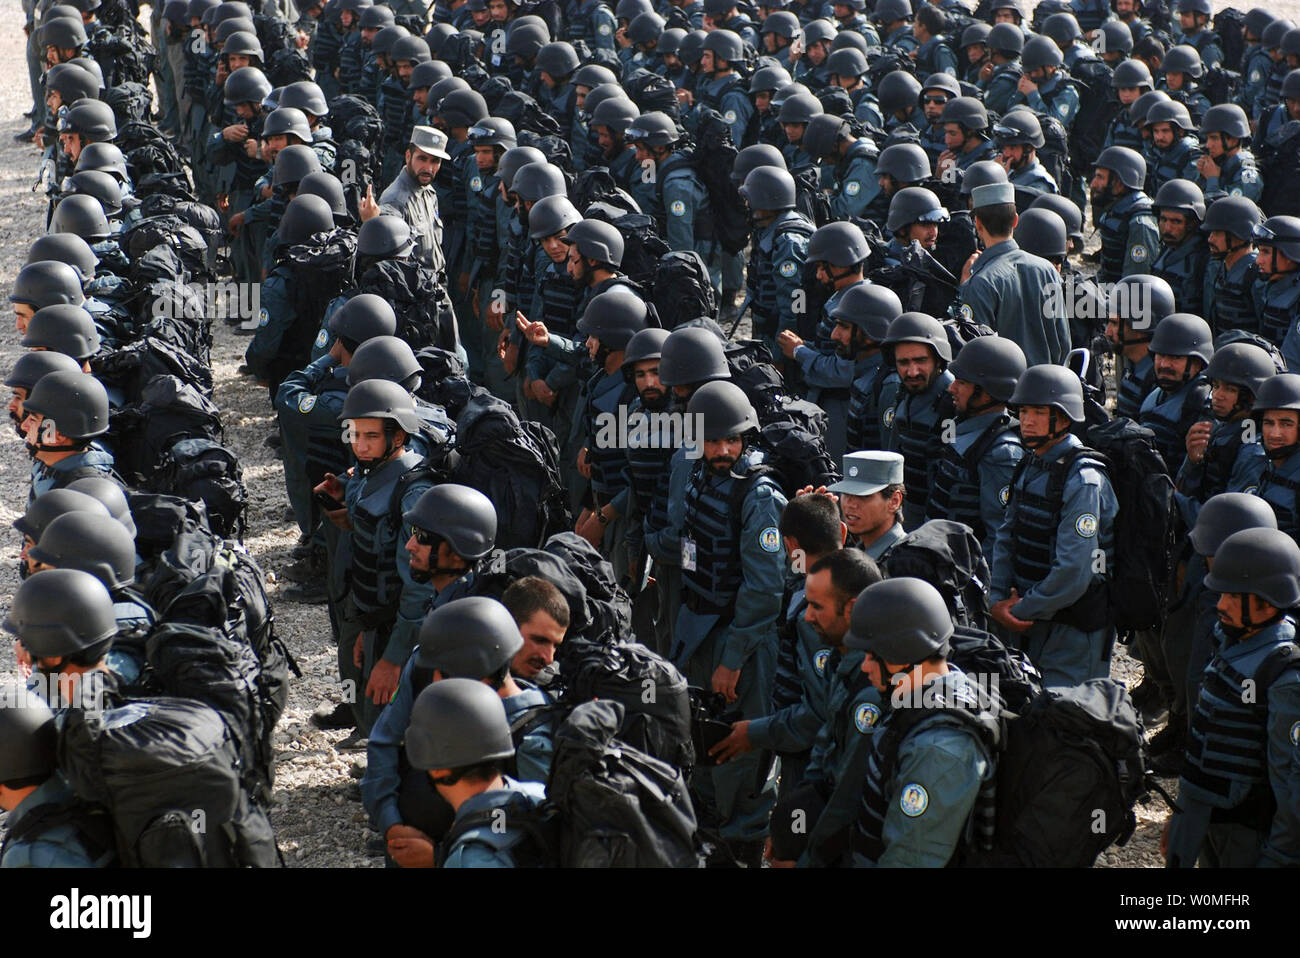 Afghan National Police (ANP) prepare to graduate from a police academy at the ANP headquarters in Herat, Afghanistan on October 29, 2009. Hundreds of graduates were part of an initiative to double the size of the ANP to 160,000 police by 2013. UPI/Stephen Decatur/U.S. Army Stock Photo